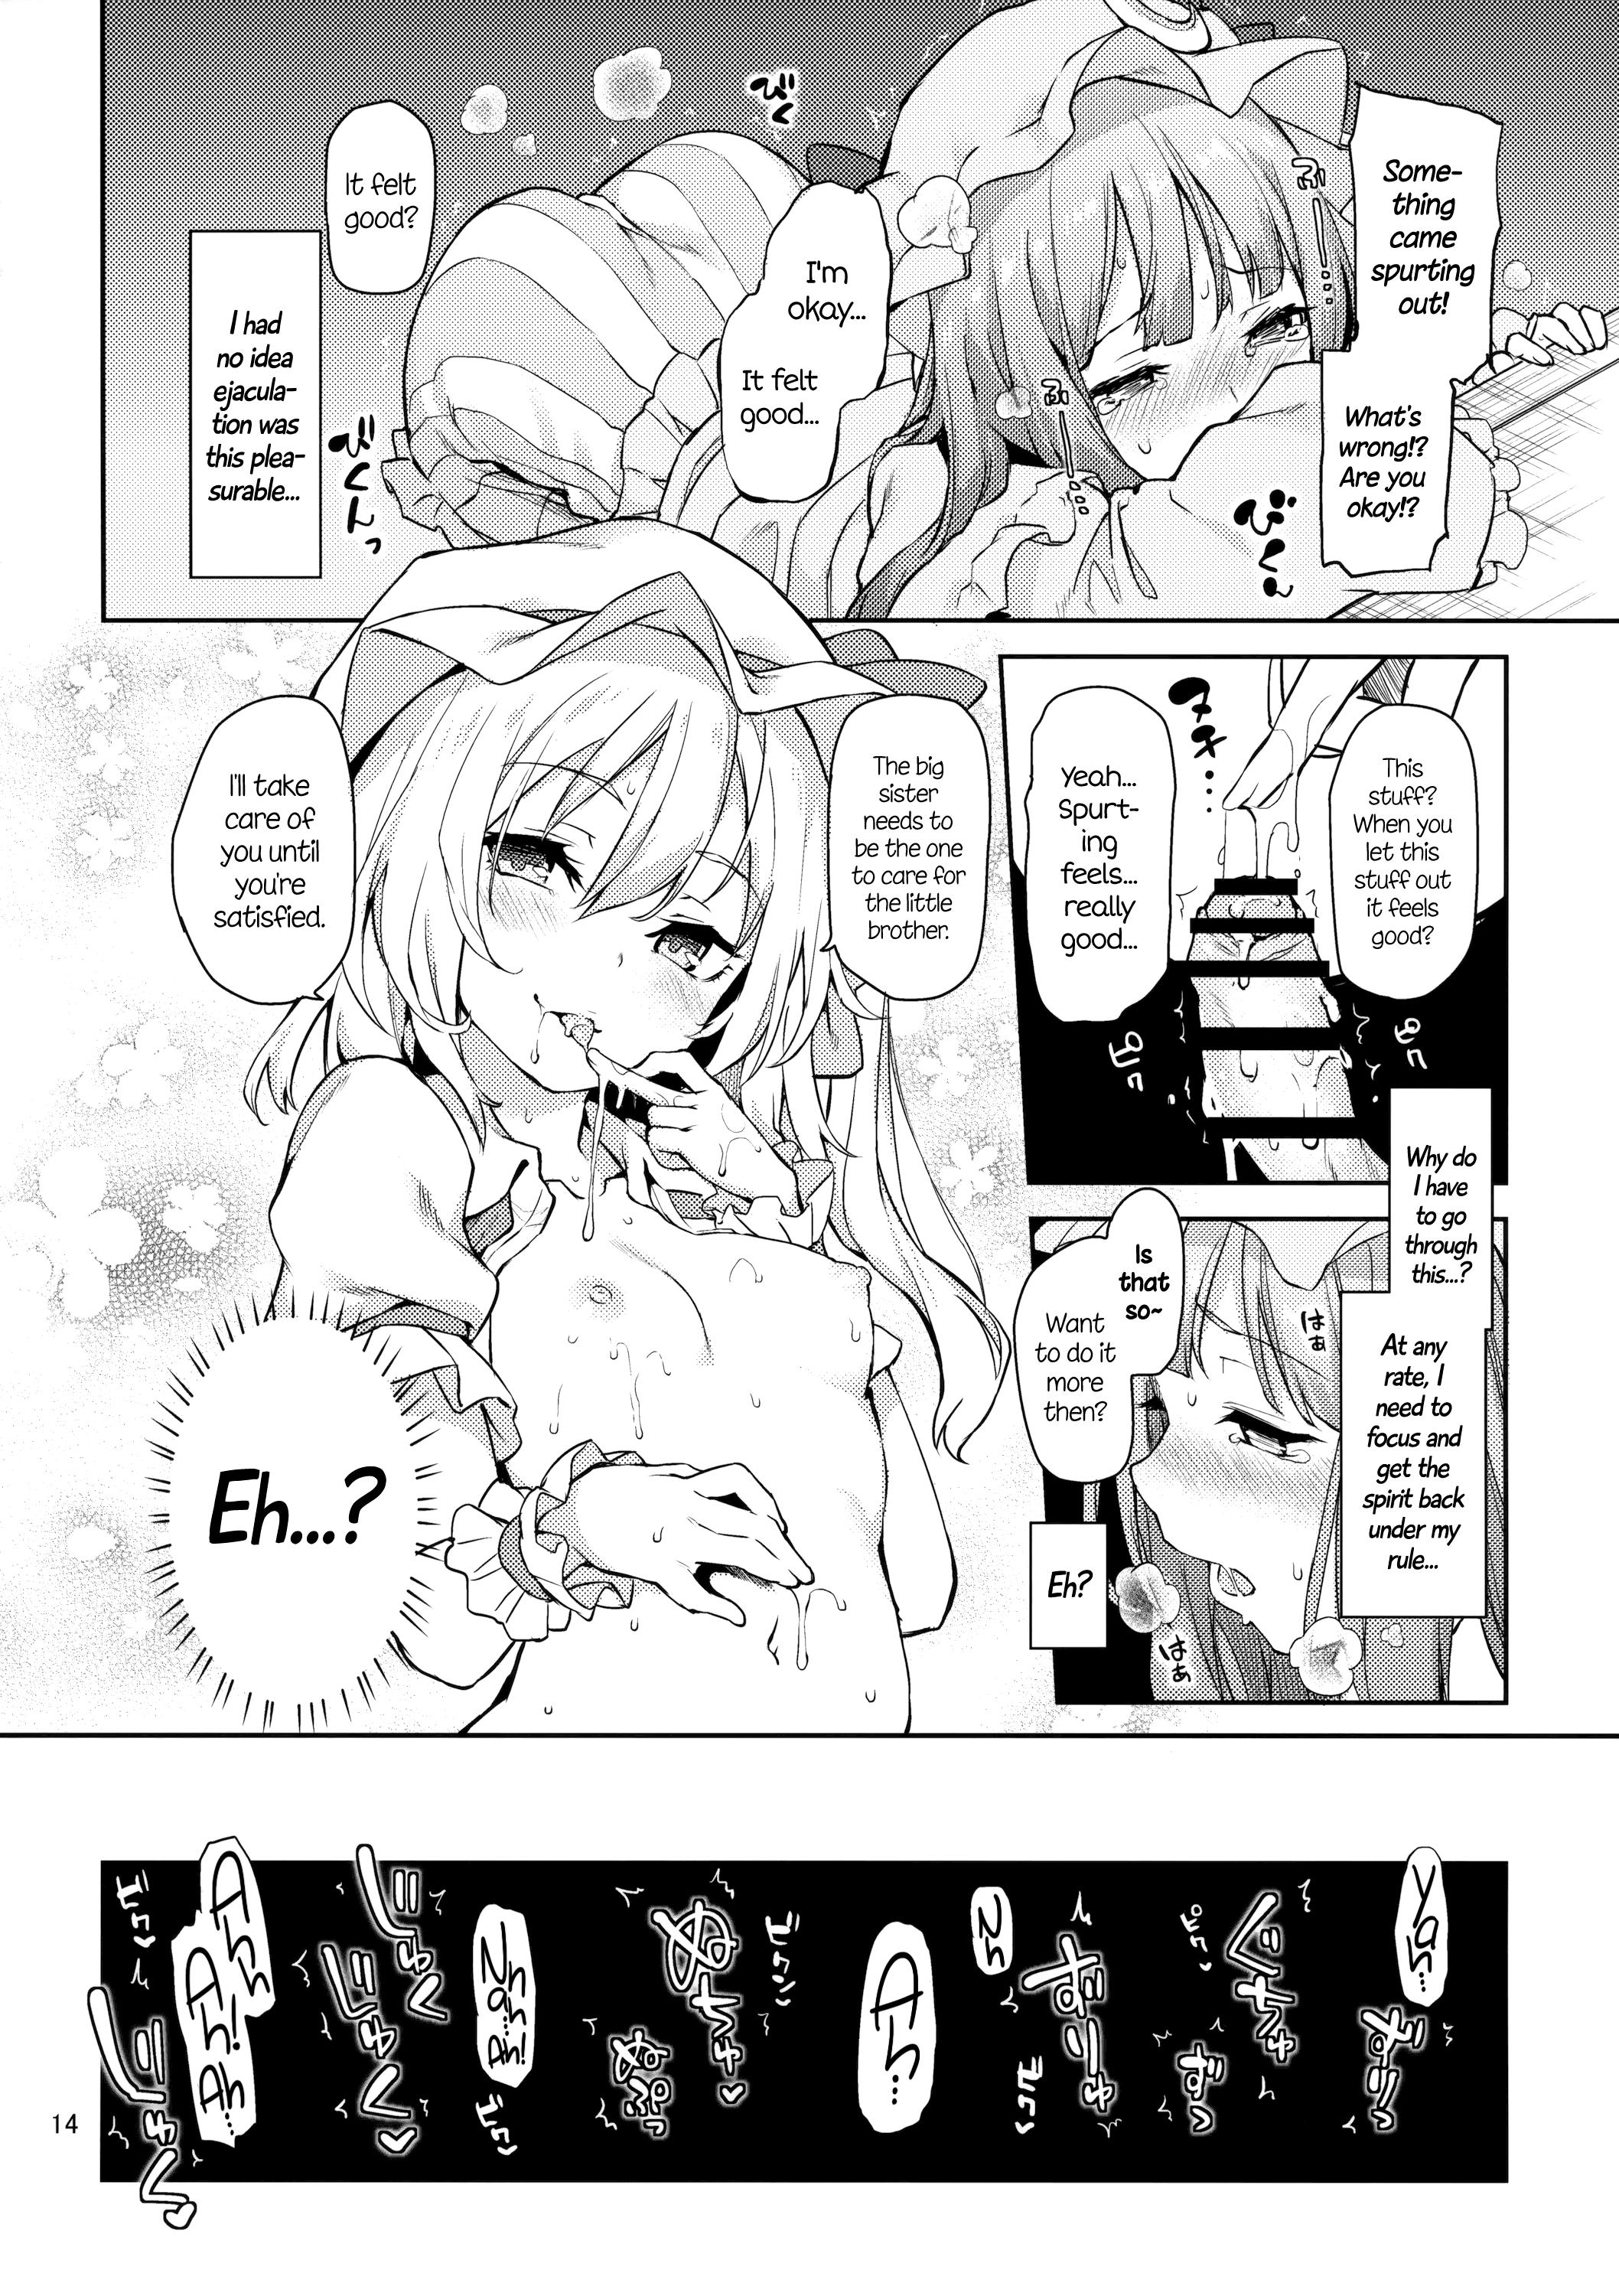 Girls Getting Fucked (Reitaisai 13) [Anmitsuyomogitei (Michiking)] Osewa Shinaide Flan Onee-chan! | Don't Take Care Of Me, Flan Onee-chan! (Touhou Project) [English] =Facedesk + CW= - Touhou project Fuck For Cash - Page 14